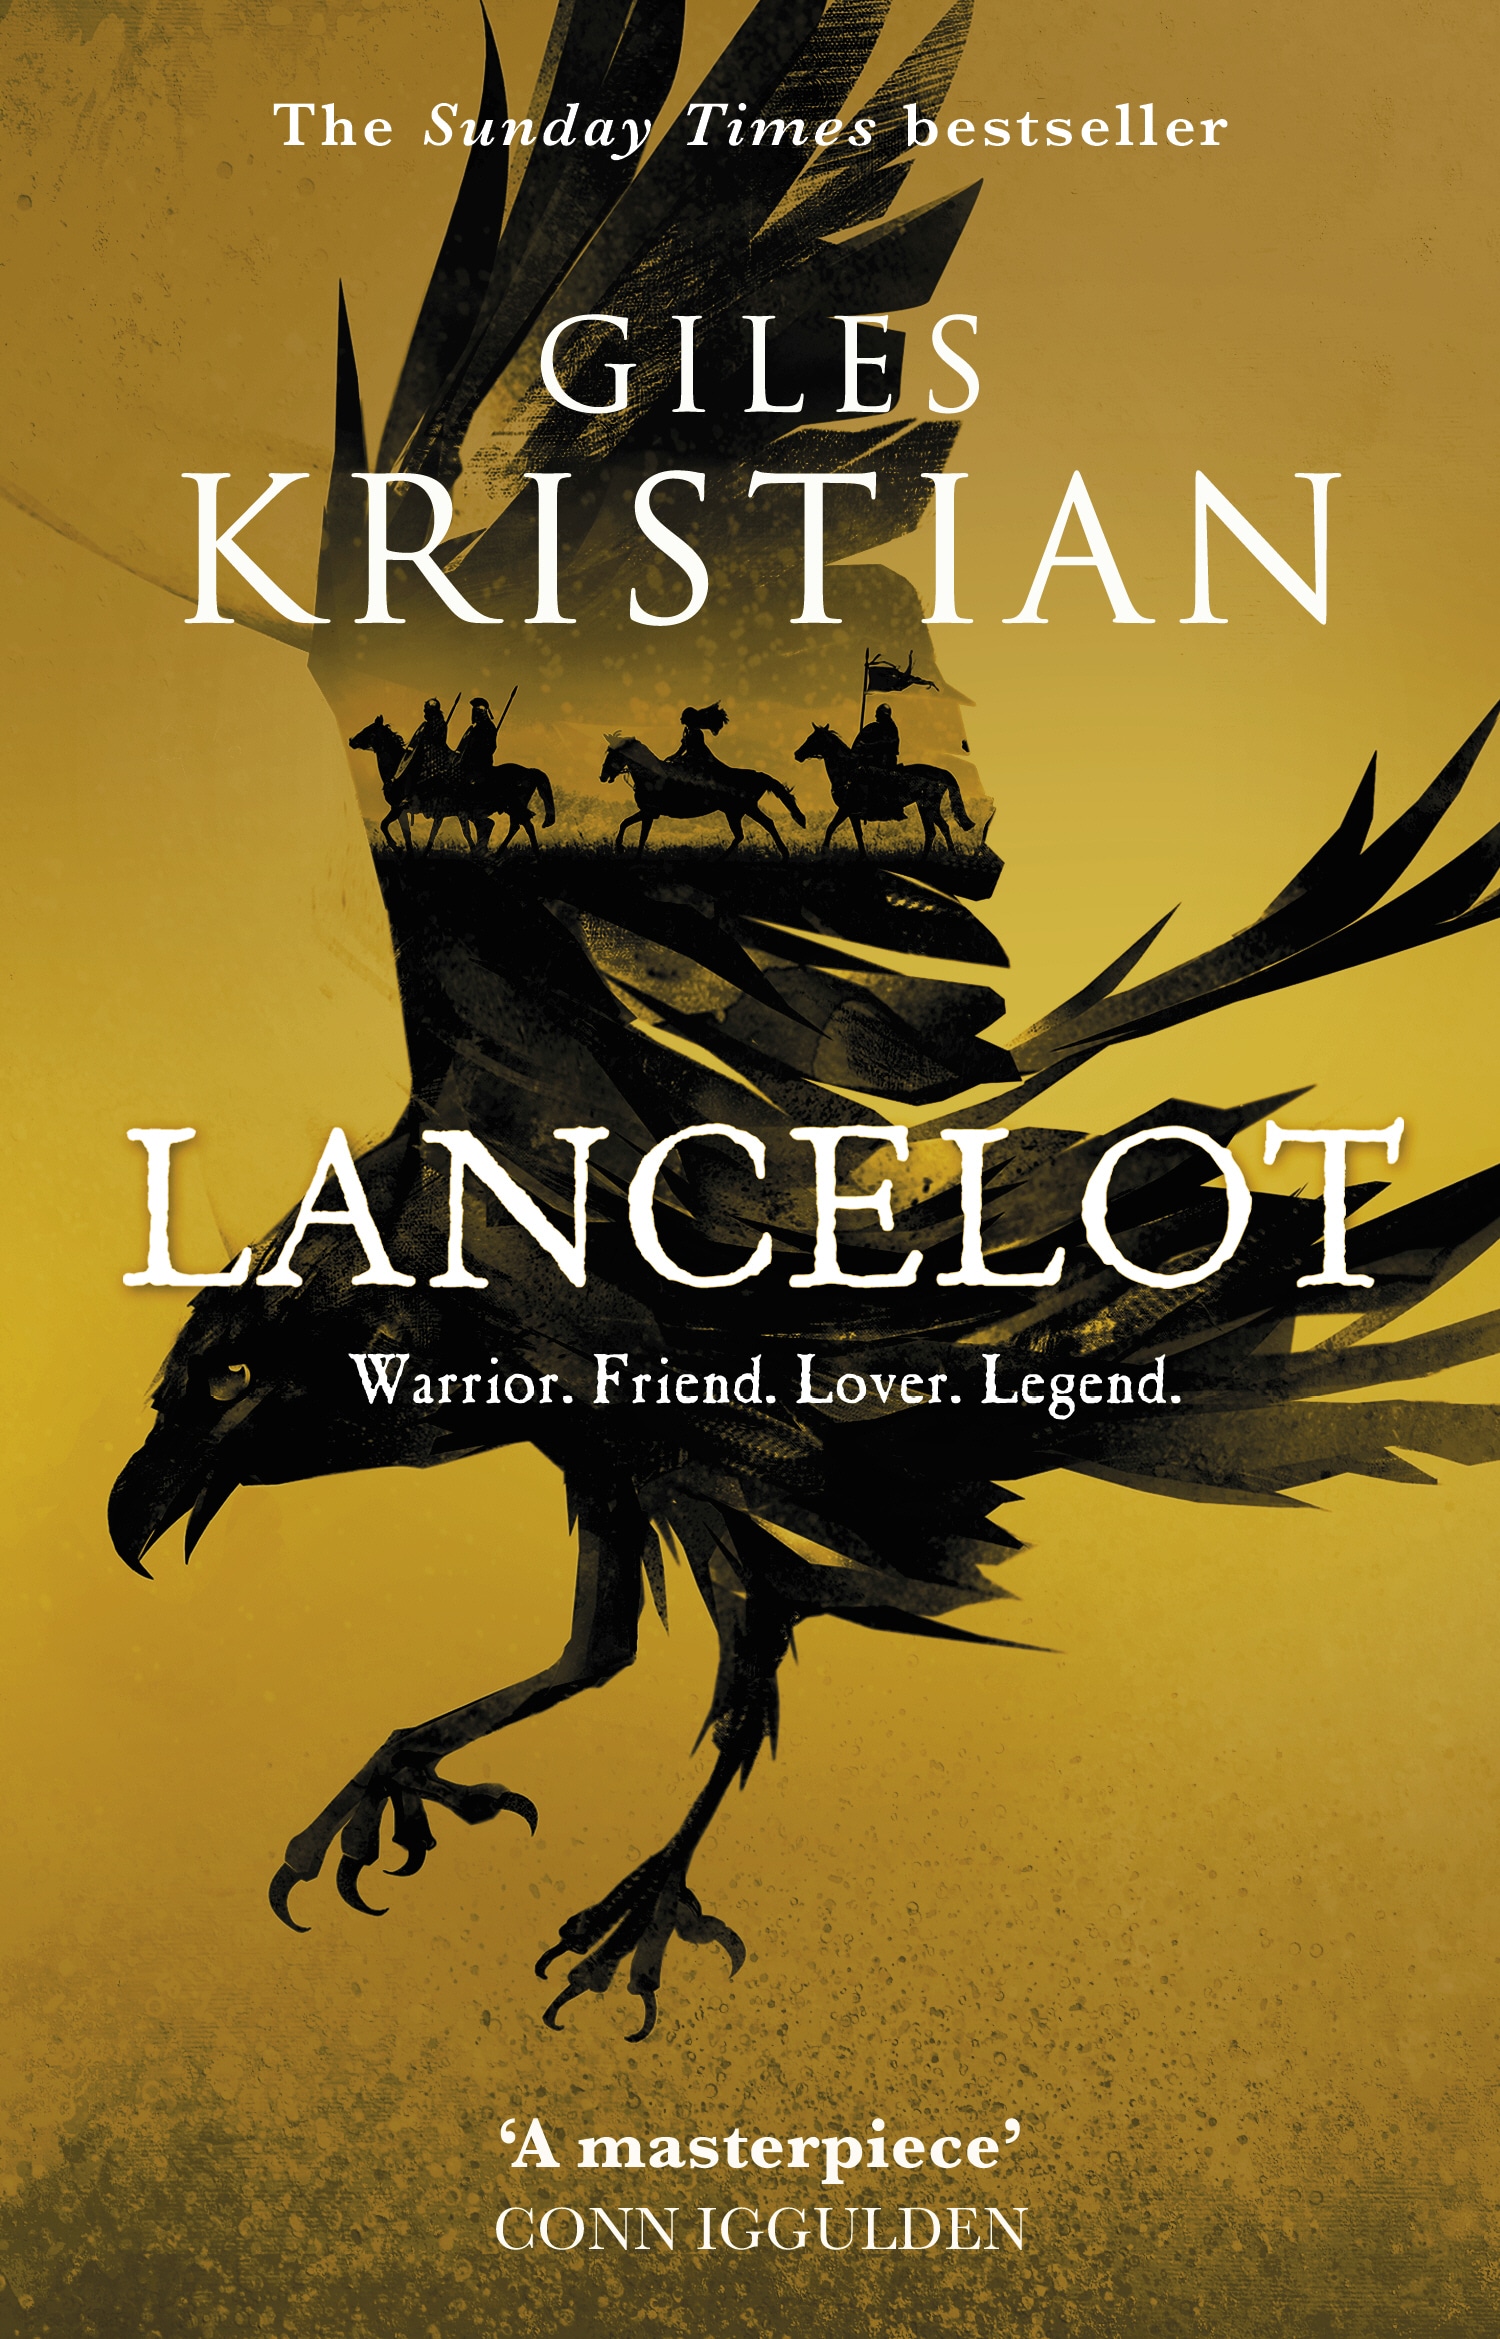 Book “Lancelot” by Giles Kristian — May 2, 2019